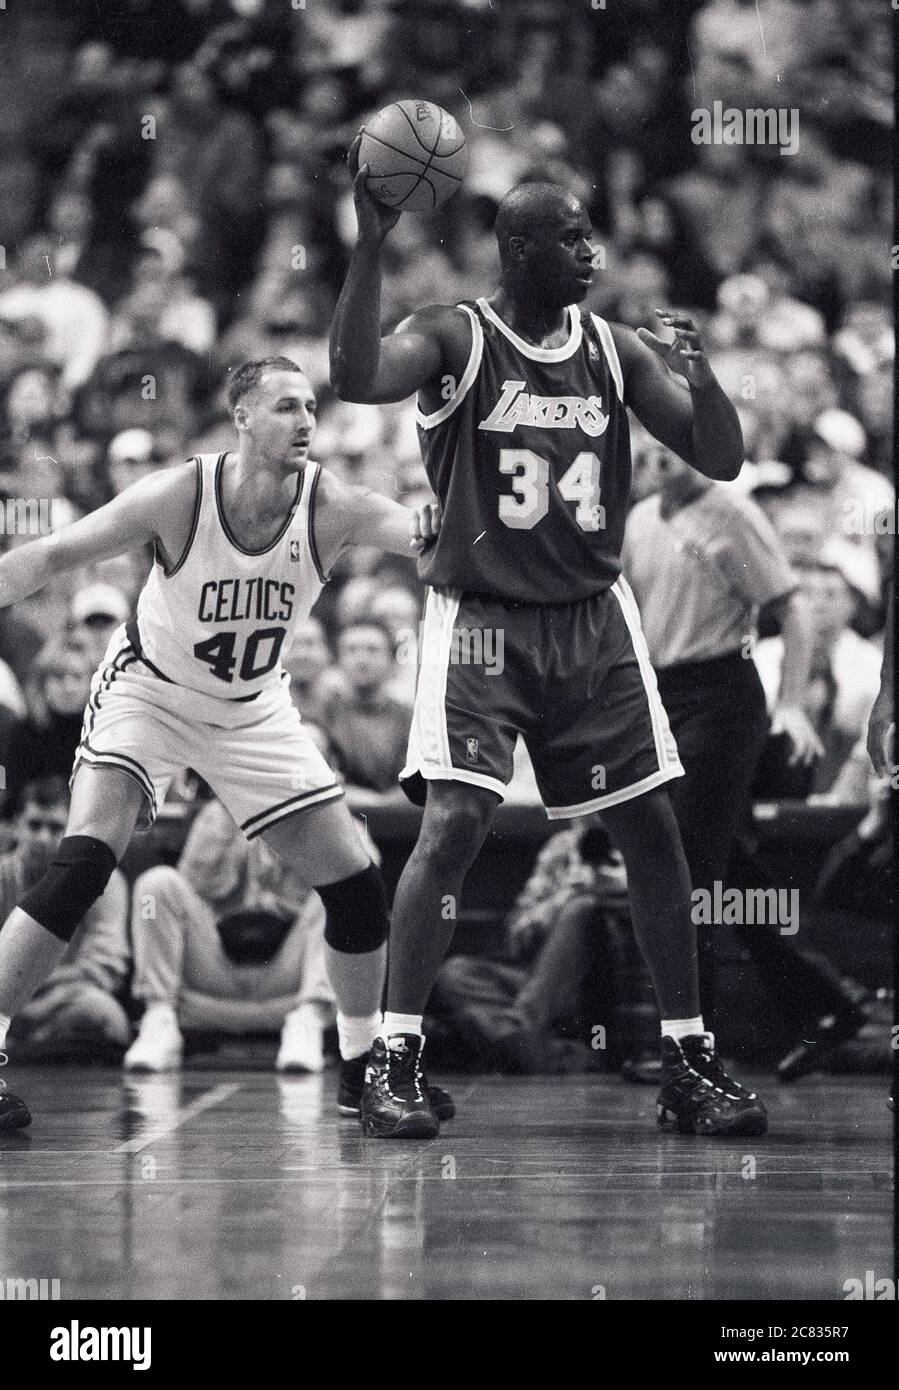 LA Lakers Shaquille O’Neal #34 (right) looks to pass the ball in game action against the Boston Celtics , at left Celtics Dino Radja during 1996-97 season at the Fleet Center in Boston Ma USA photoby Bill Belknap Stock Photo